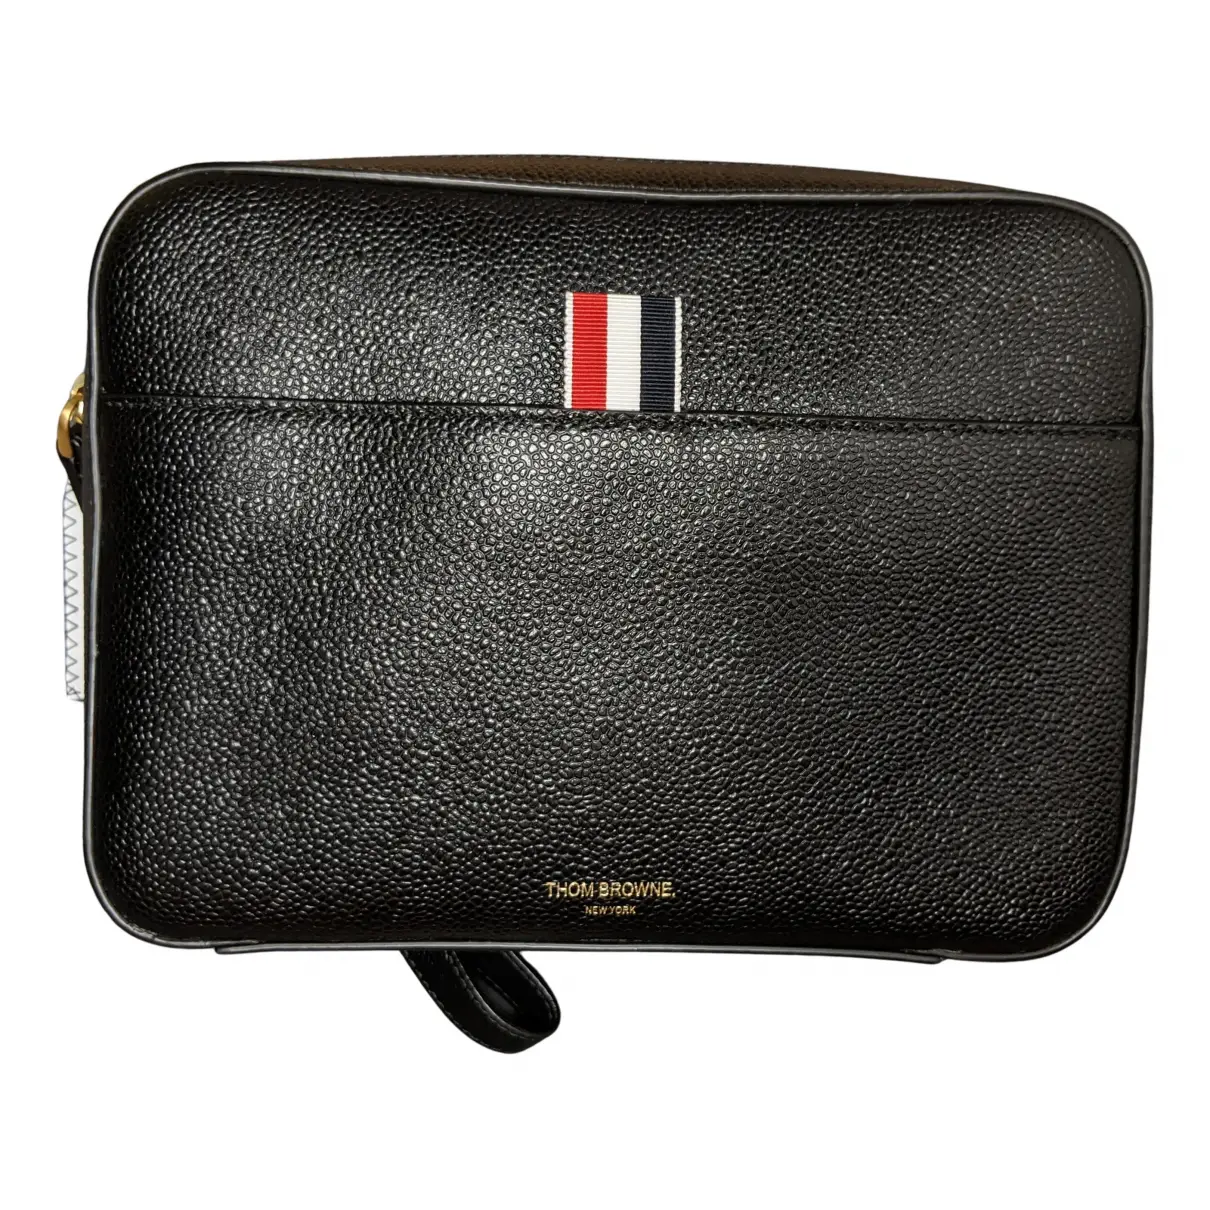 Leather small bag Thom Browne